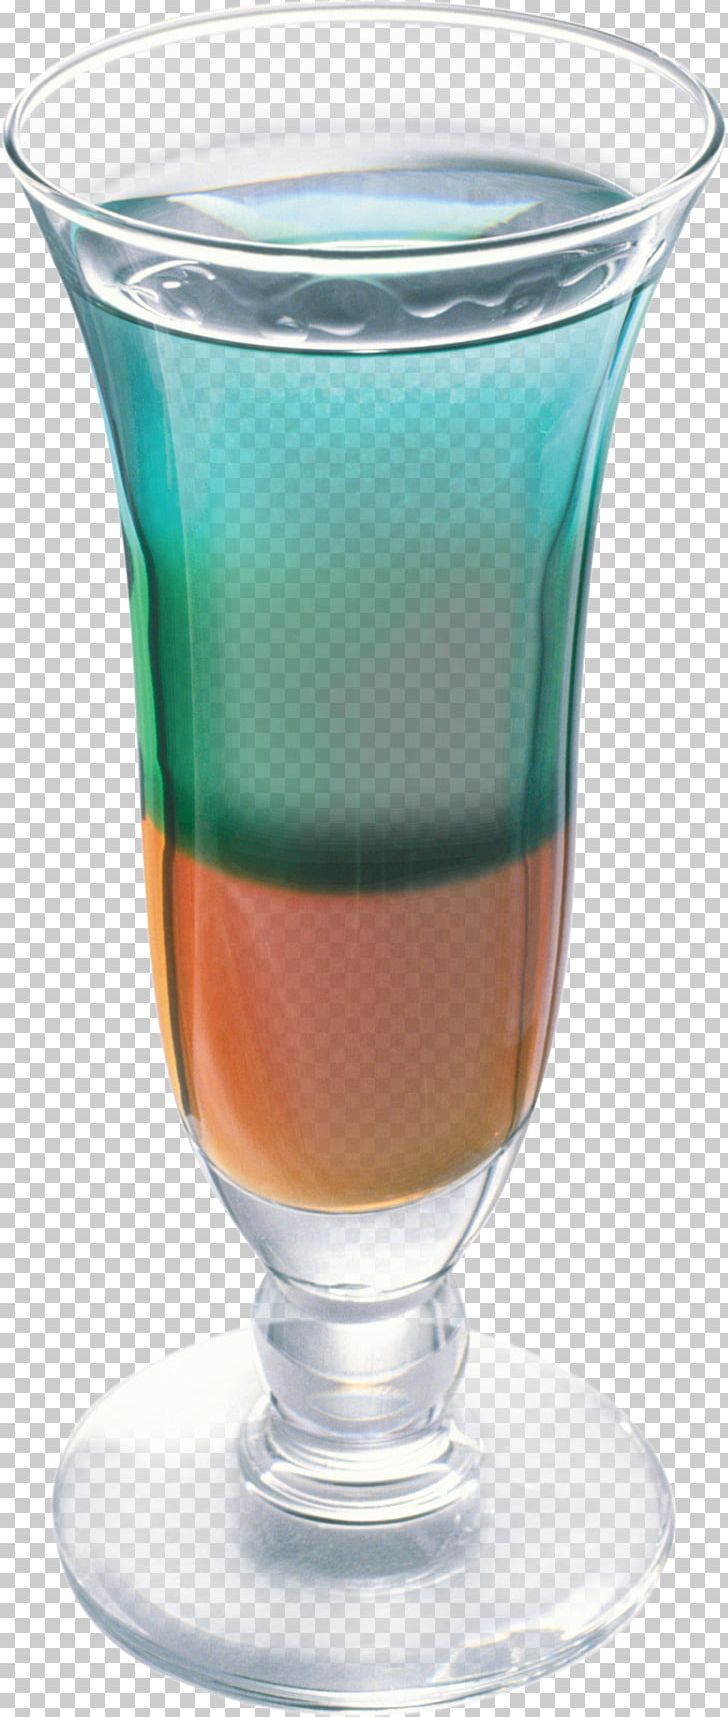 Cocktail Glass Blue Lagoon Juice Wine PNG, Clipart, Alcoholic Drink, Blue Lagoon, Bottle, Cocktail, Cocktail Garnish Free PNG Download